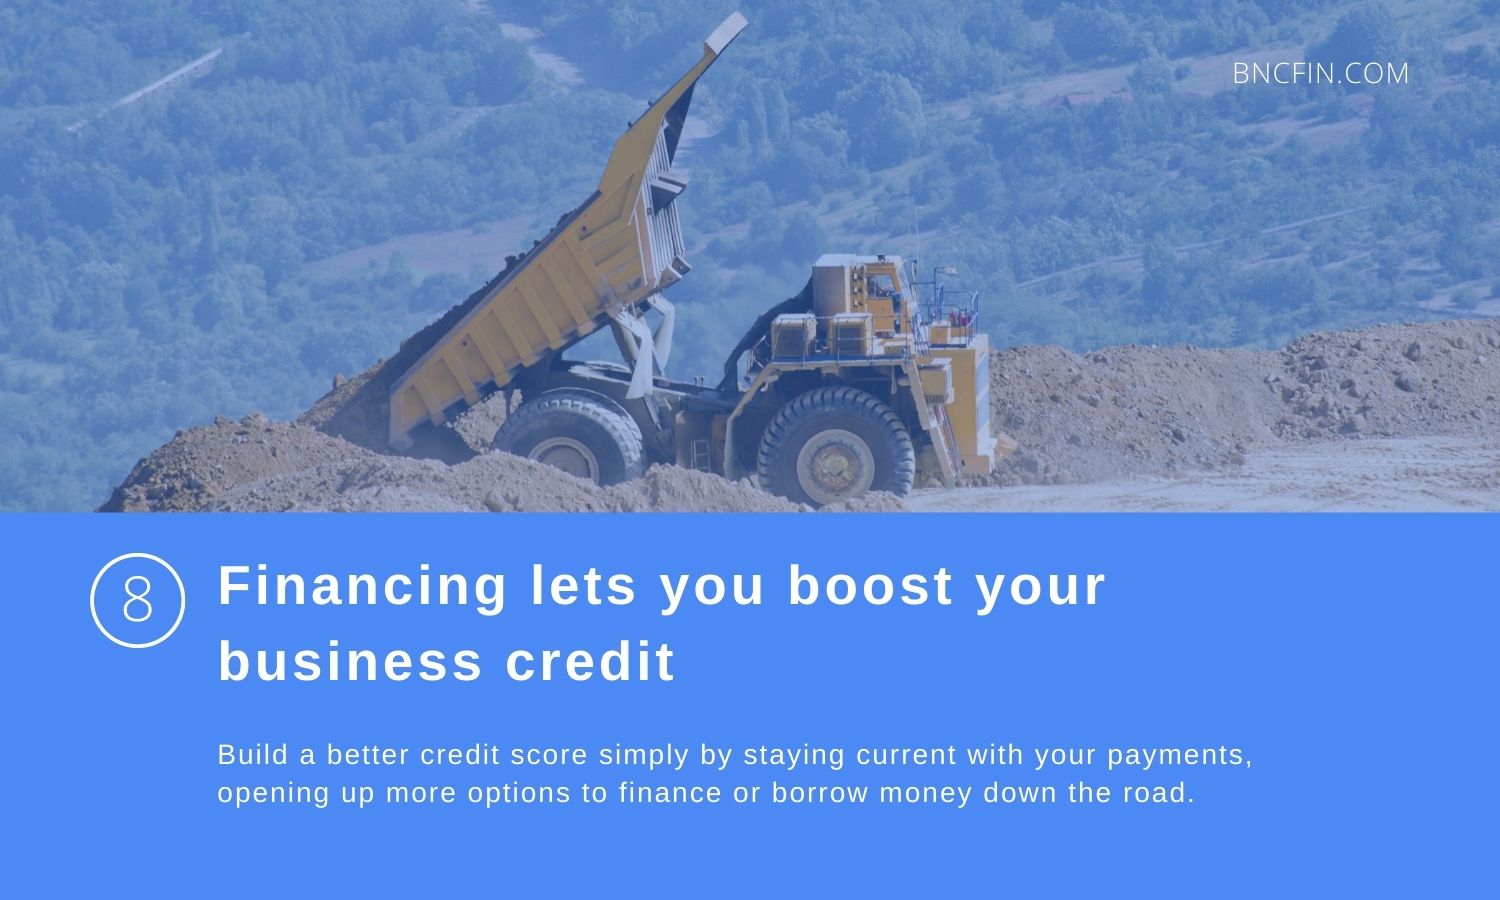 Dump truck Financing lets you boost business credit